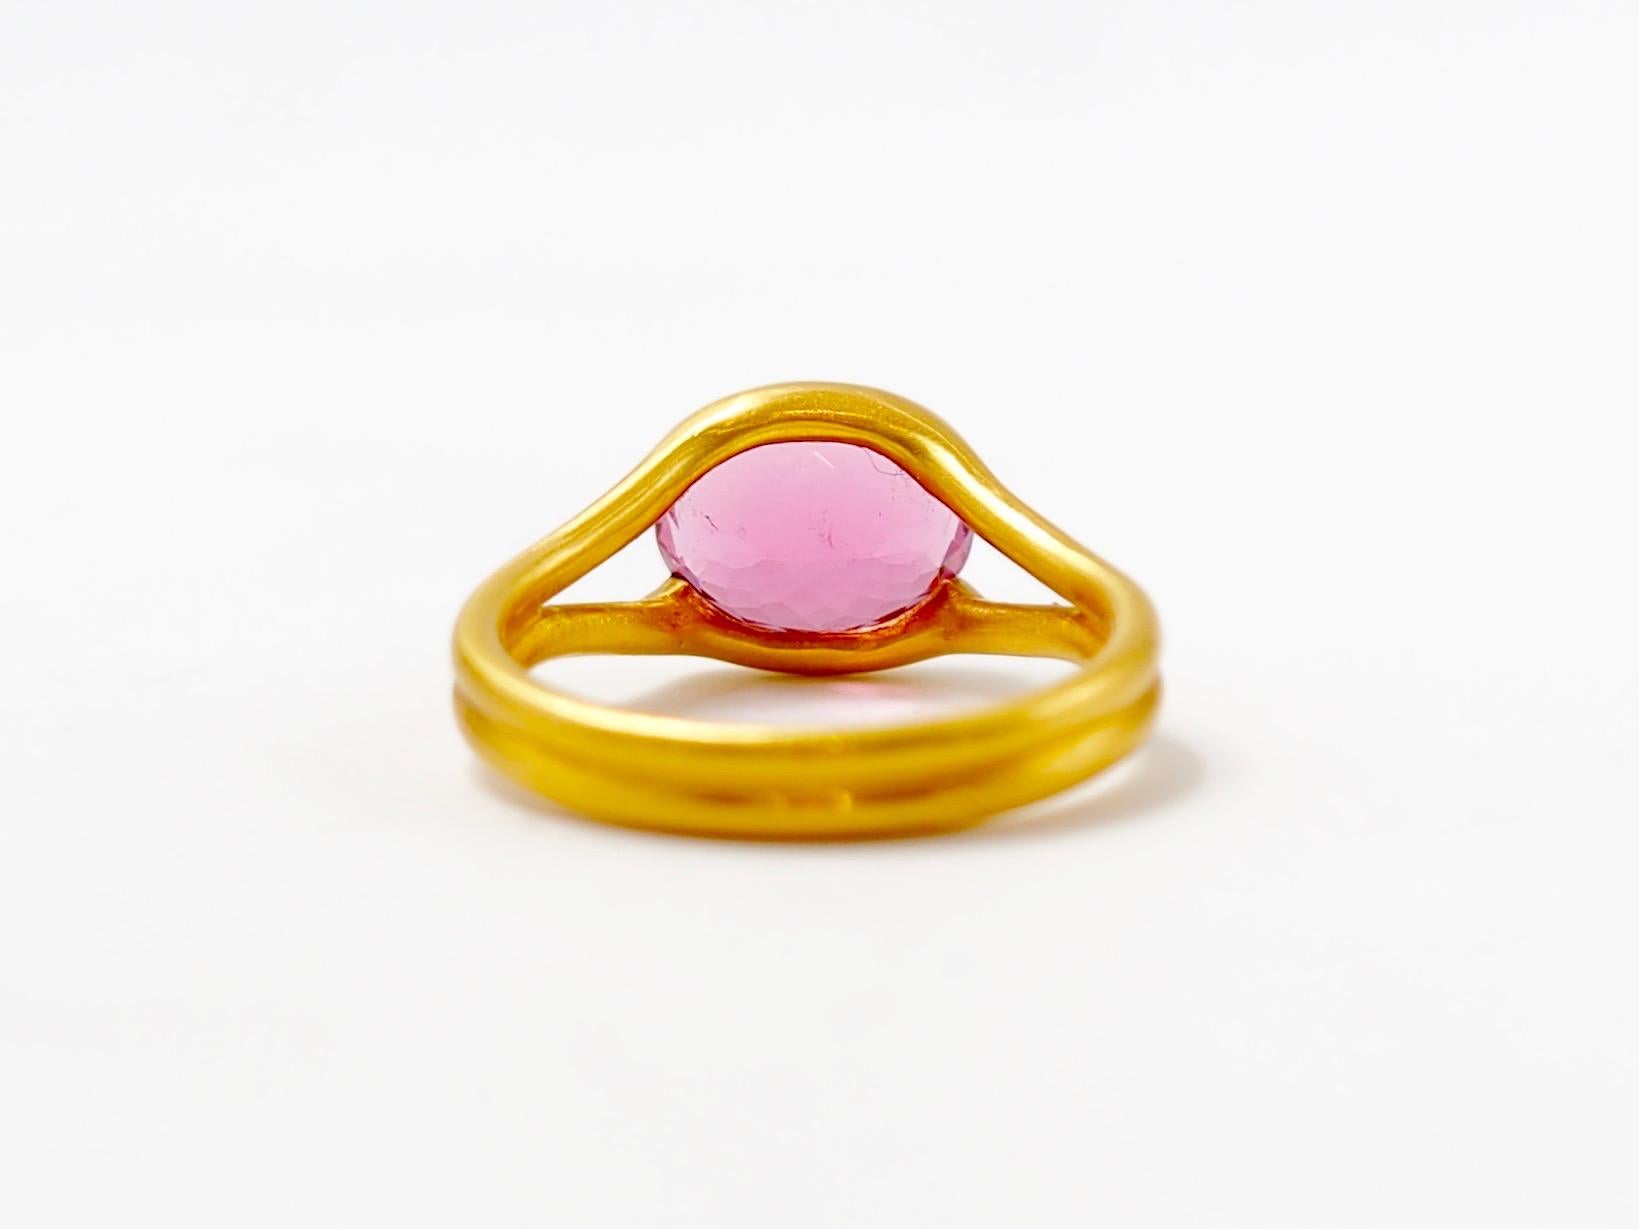 Scrives 2.38 Carat Hot Pink Tourmaline Oval 22 Karat Gold Handmade Cocktail Ring In New Condition For Sale In Paris, Paris